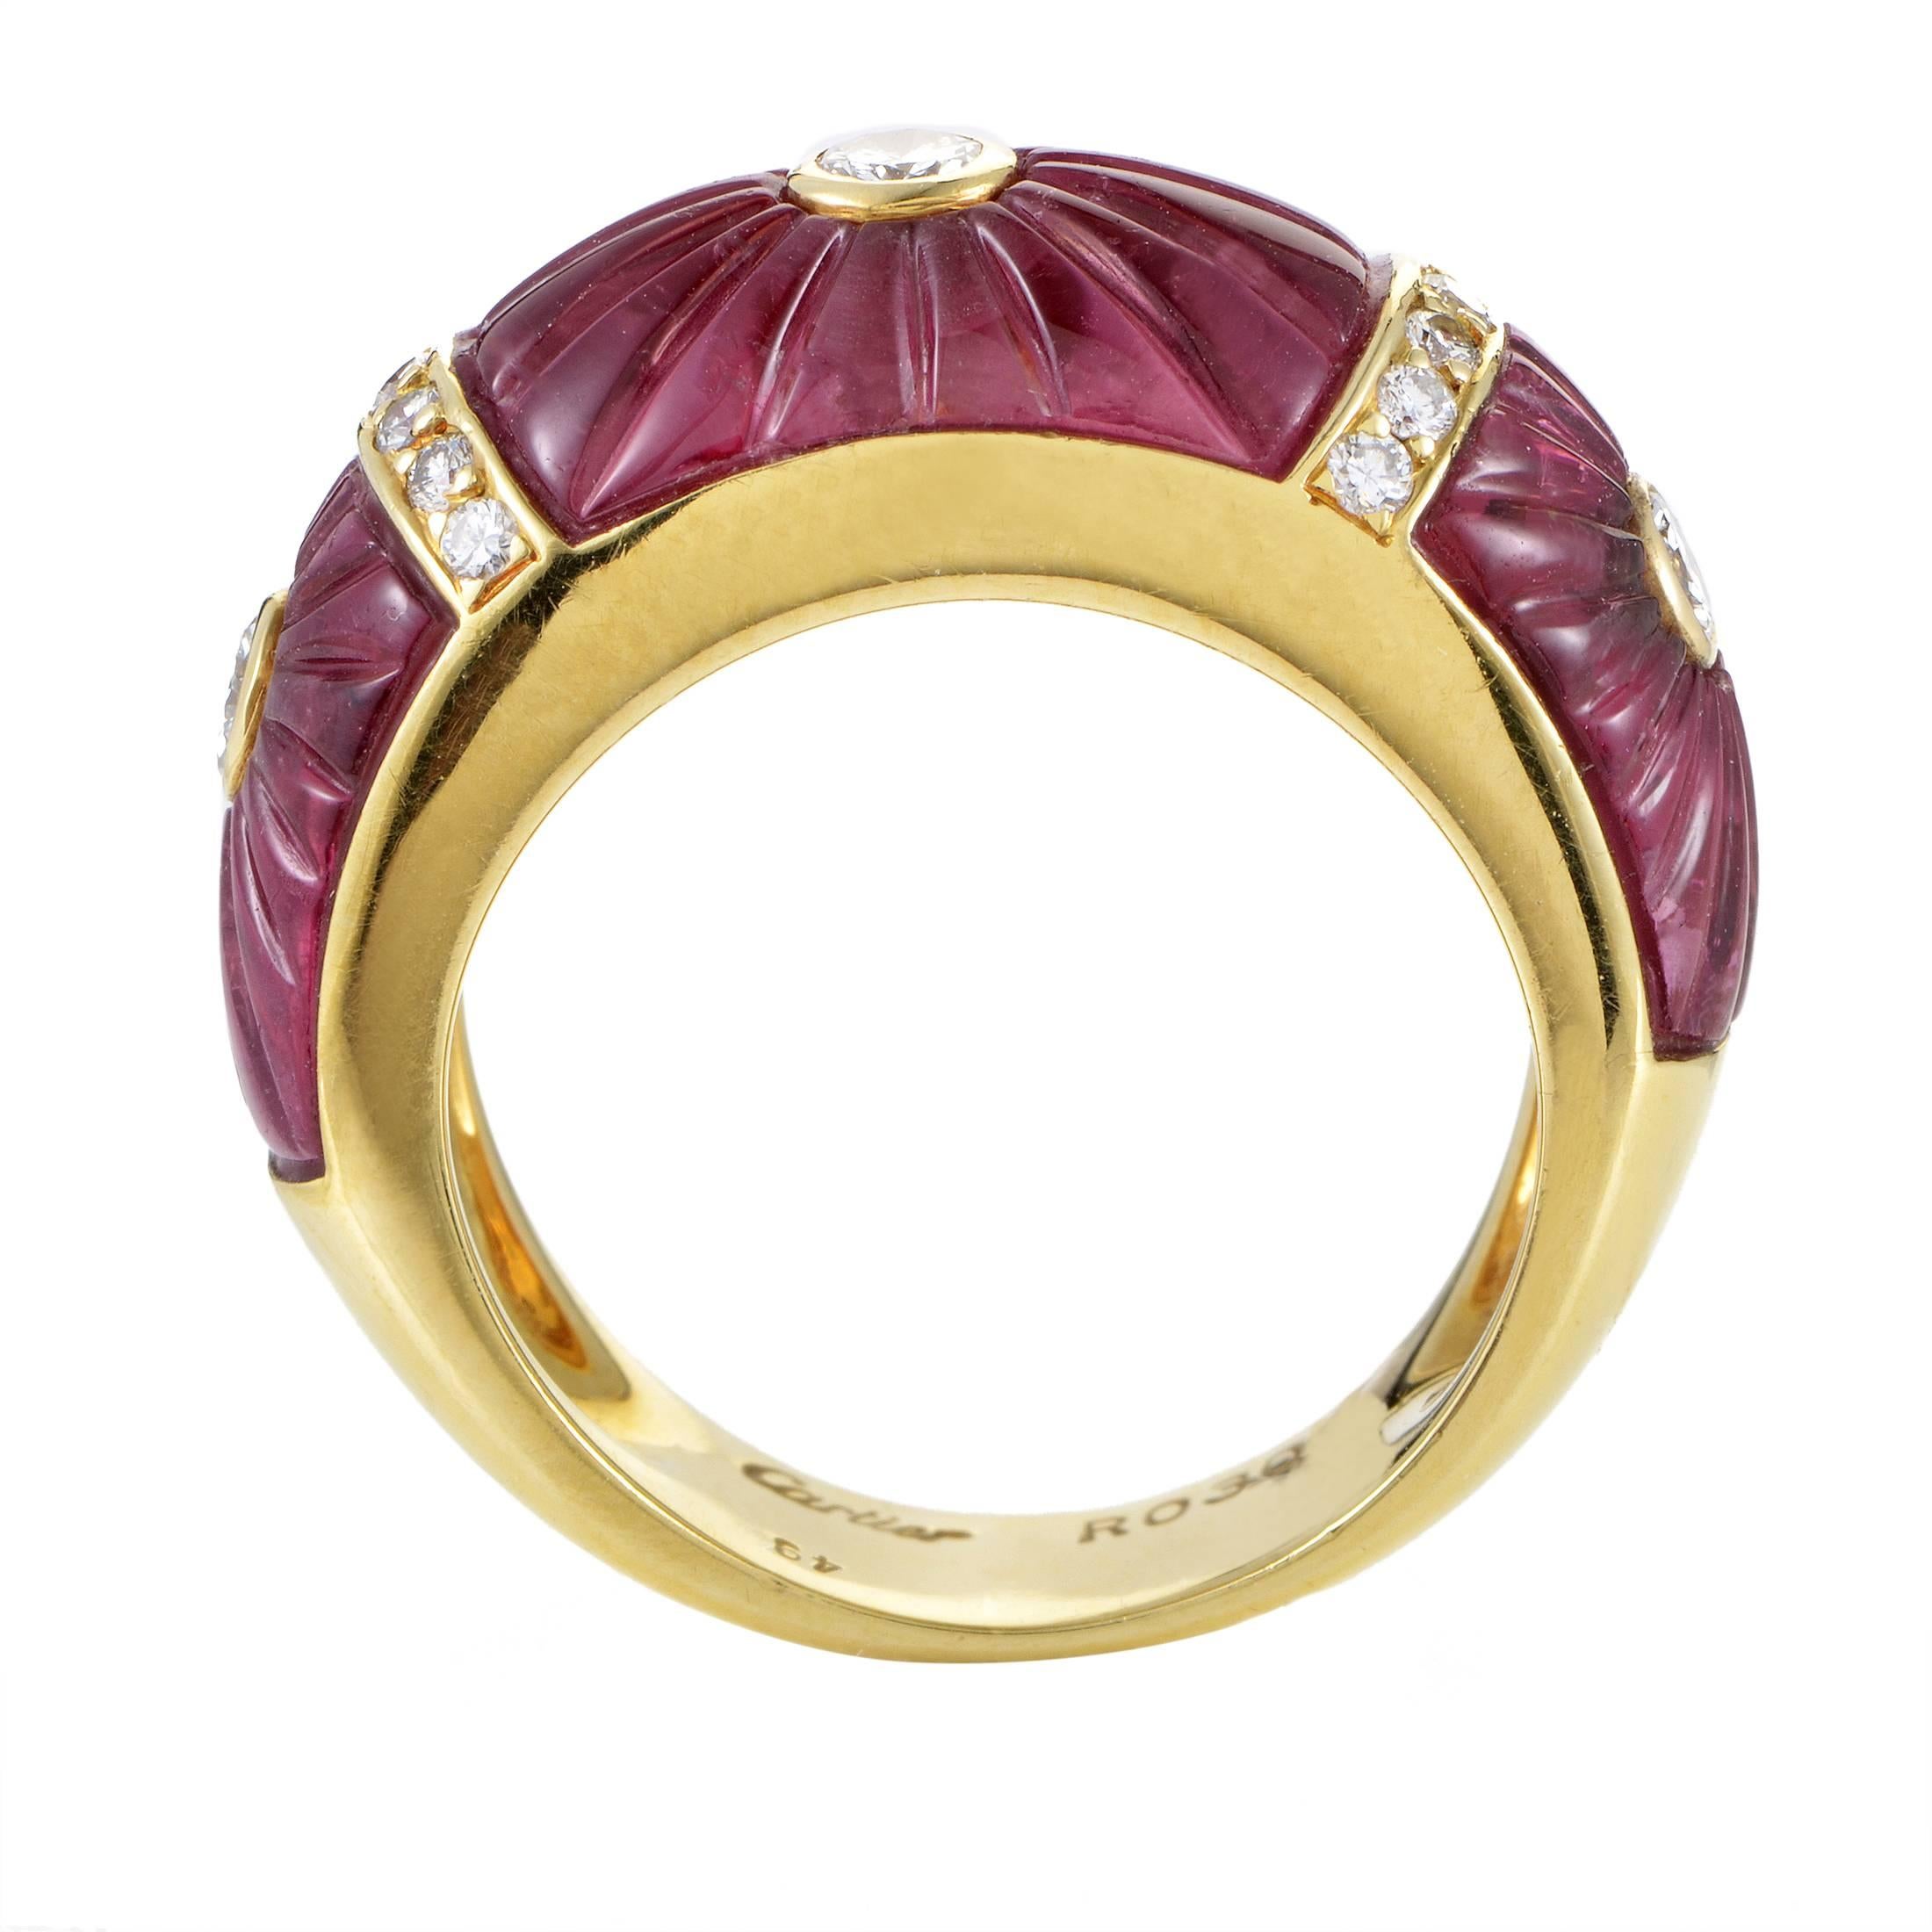 Exuding their prestigious brilliance against the captivating color and appealing shape of the gorgeous tourmalines, lustrous diamonds weighing in total 0.44ct produce a scintillating allure in this astonishing 18K yellow gold ring from